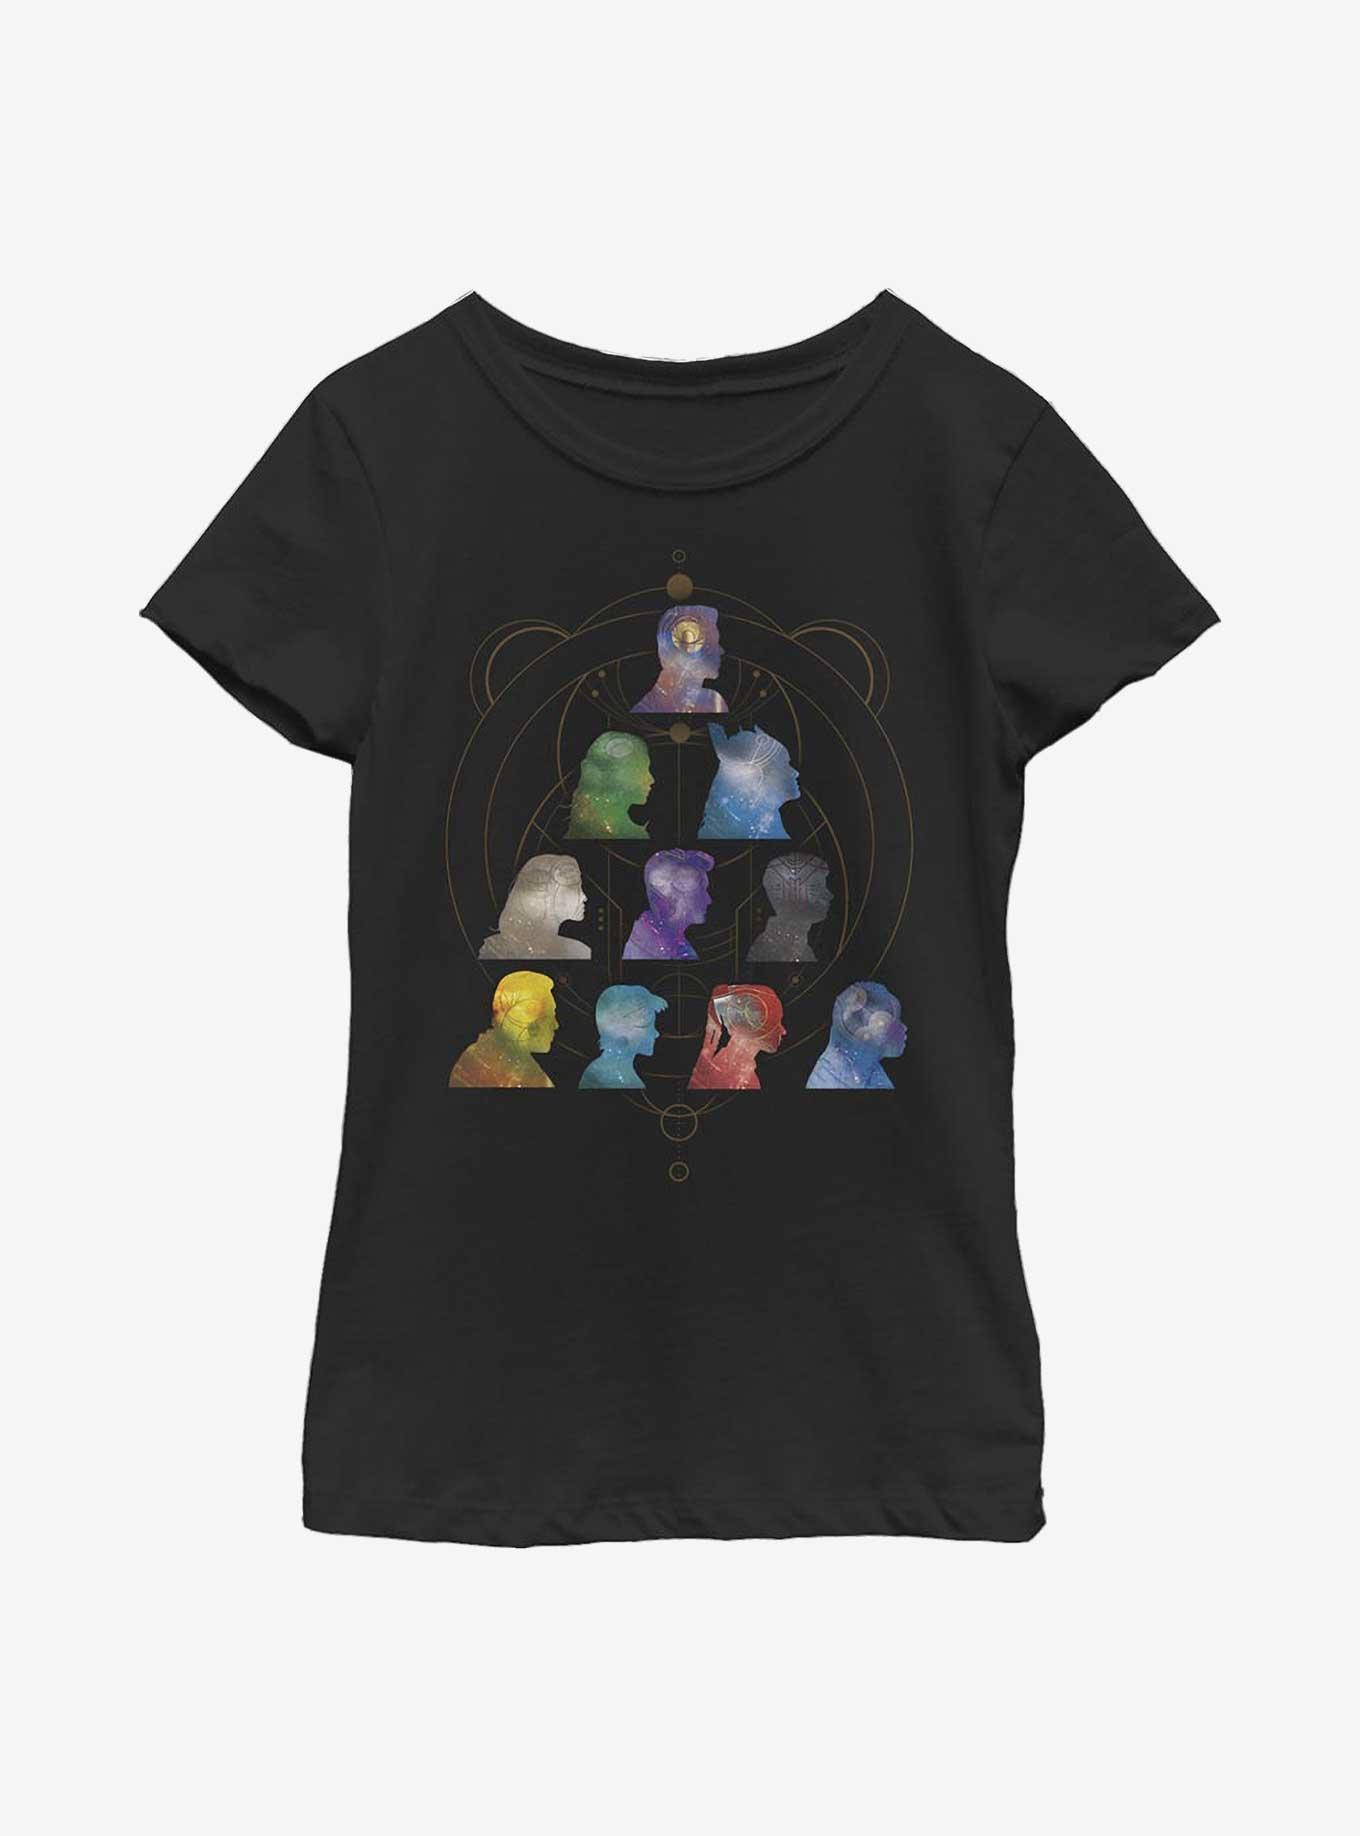 Marvel Eternals Silhouette Heads Pyramid Youth Girls T-Shirt, BLACK, hi-res